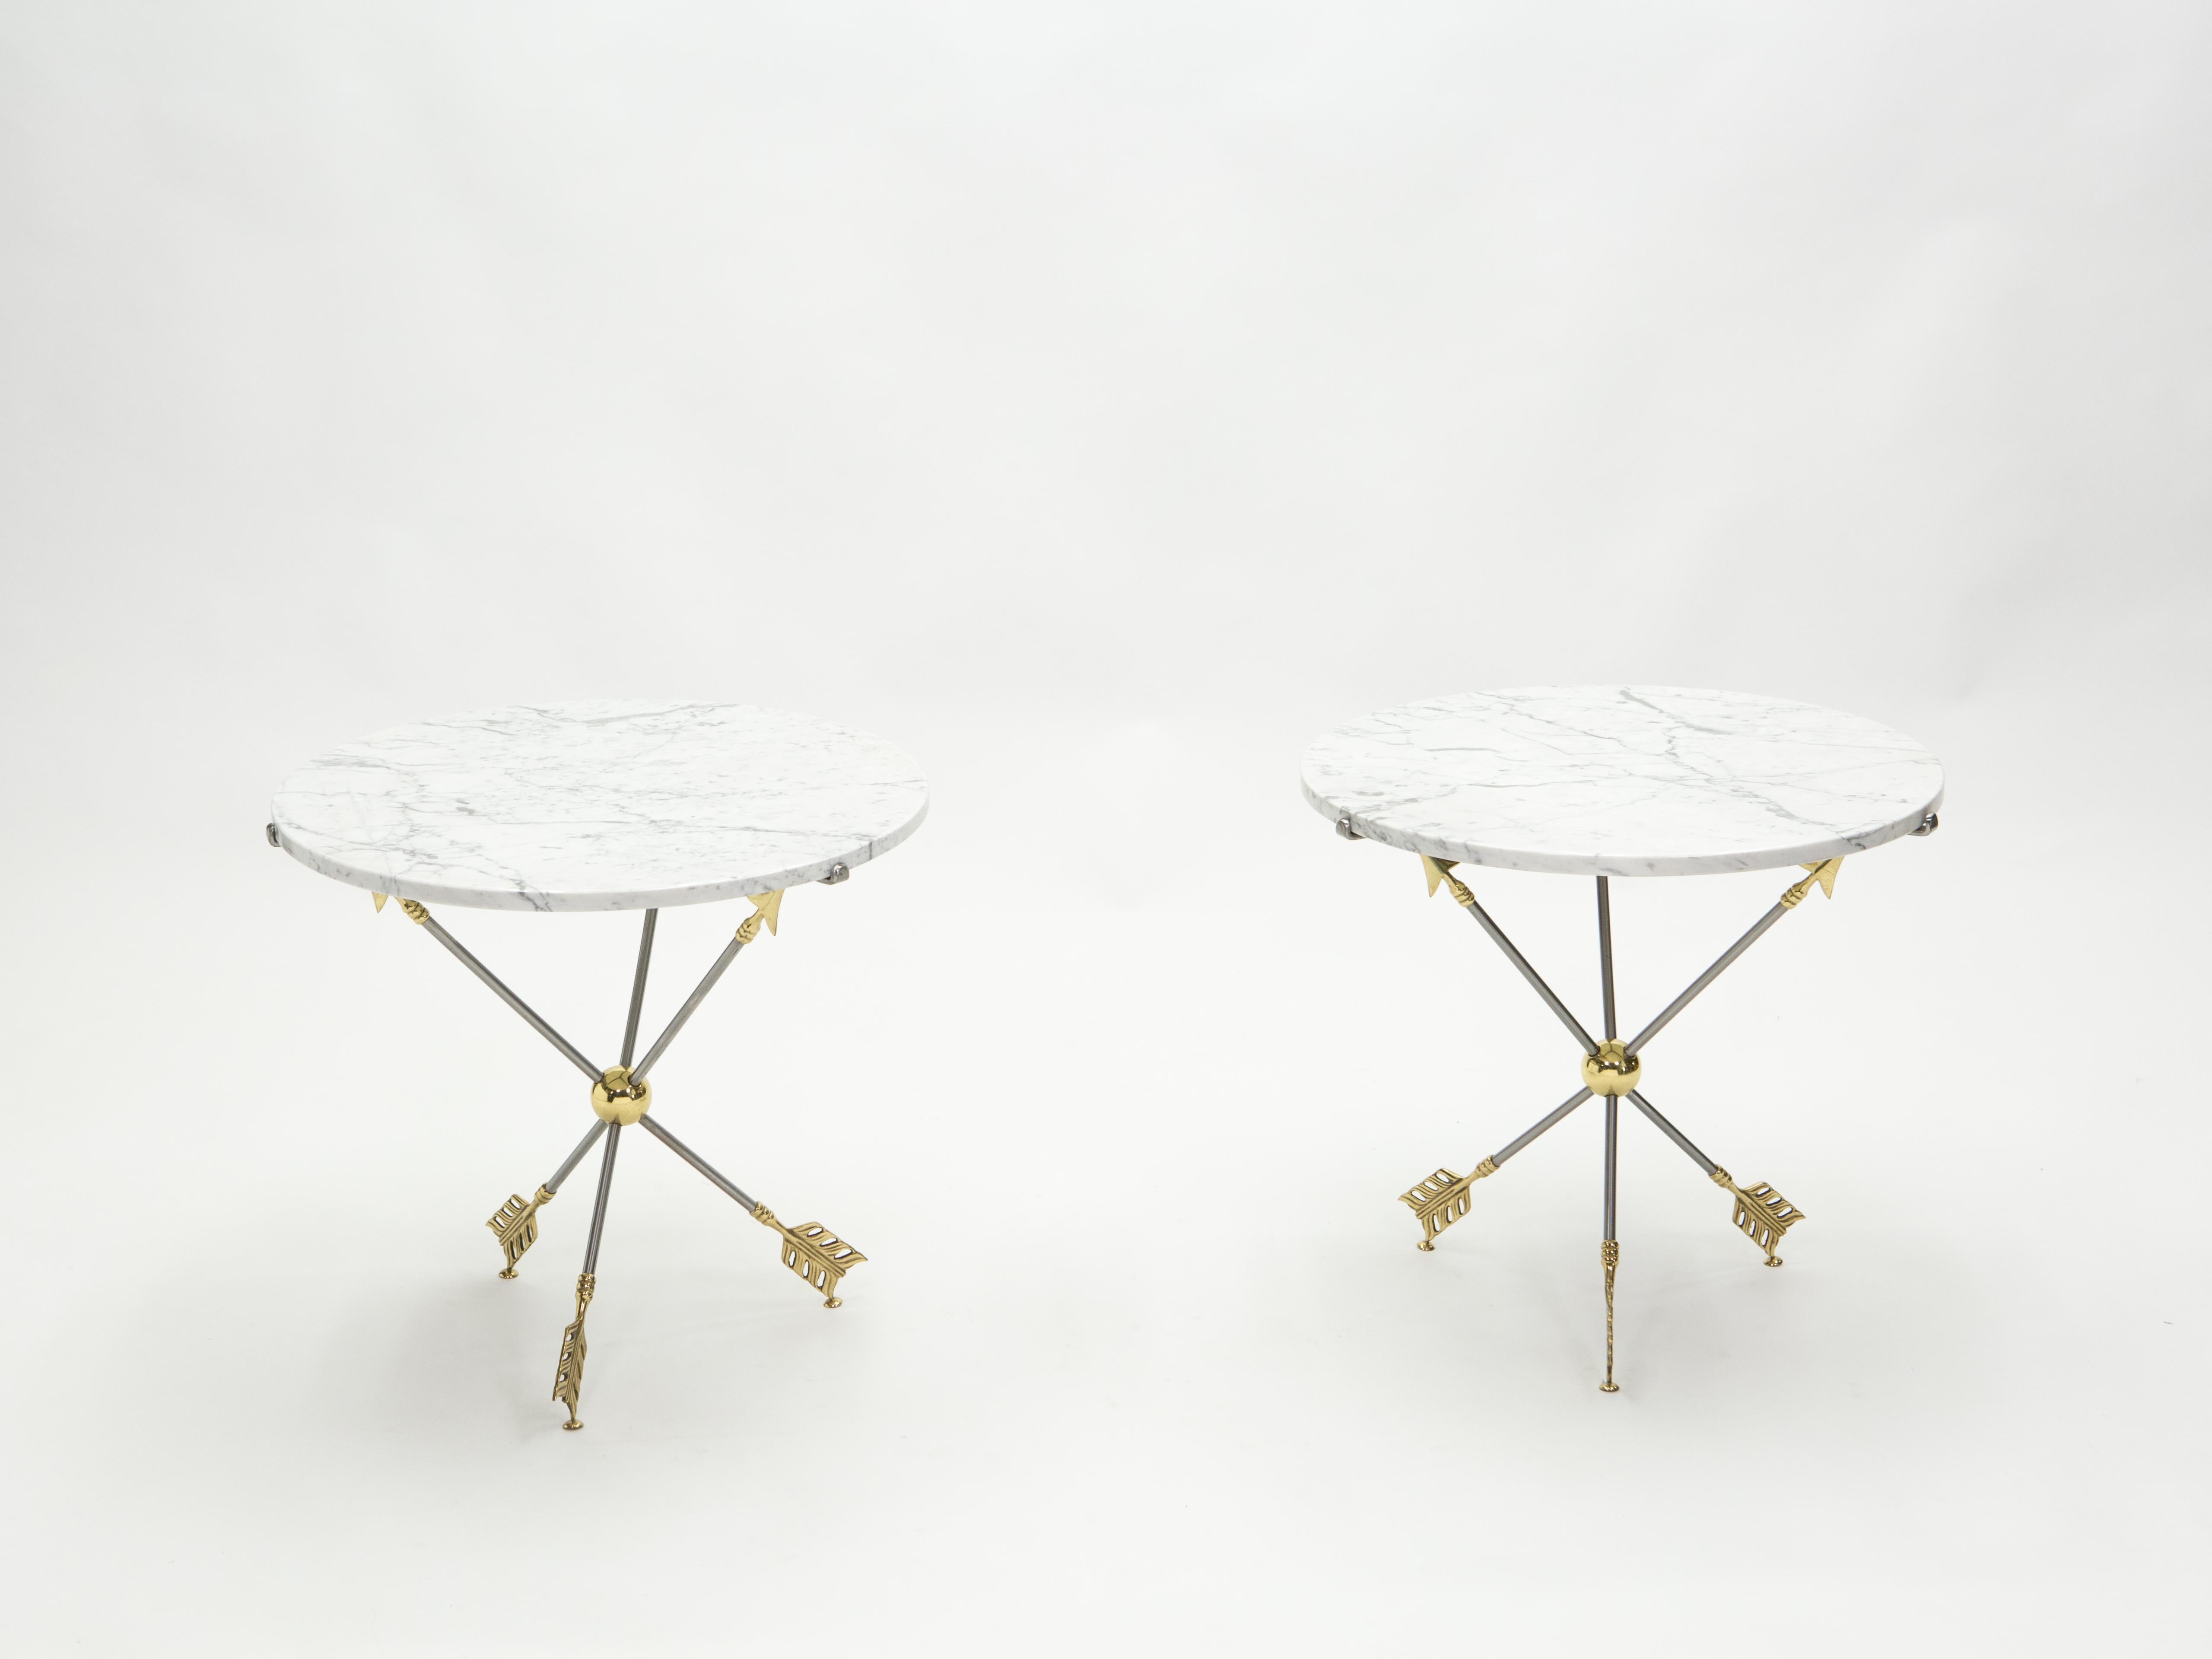 This pair of gueridon tables from the 1970’s is a beautiful example of French neoclassical design by Maison Jansen. With its sleek look, it also feels inspired by Art Deco design, like André Arbus and Jean-Michel Frank, using the arrows tripode